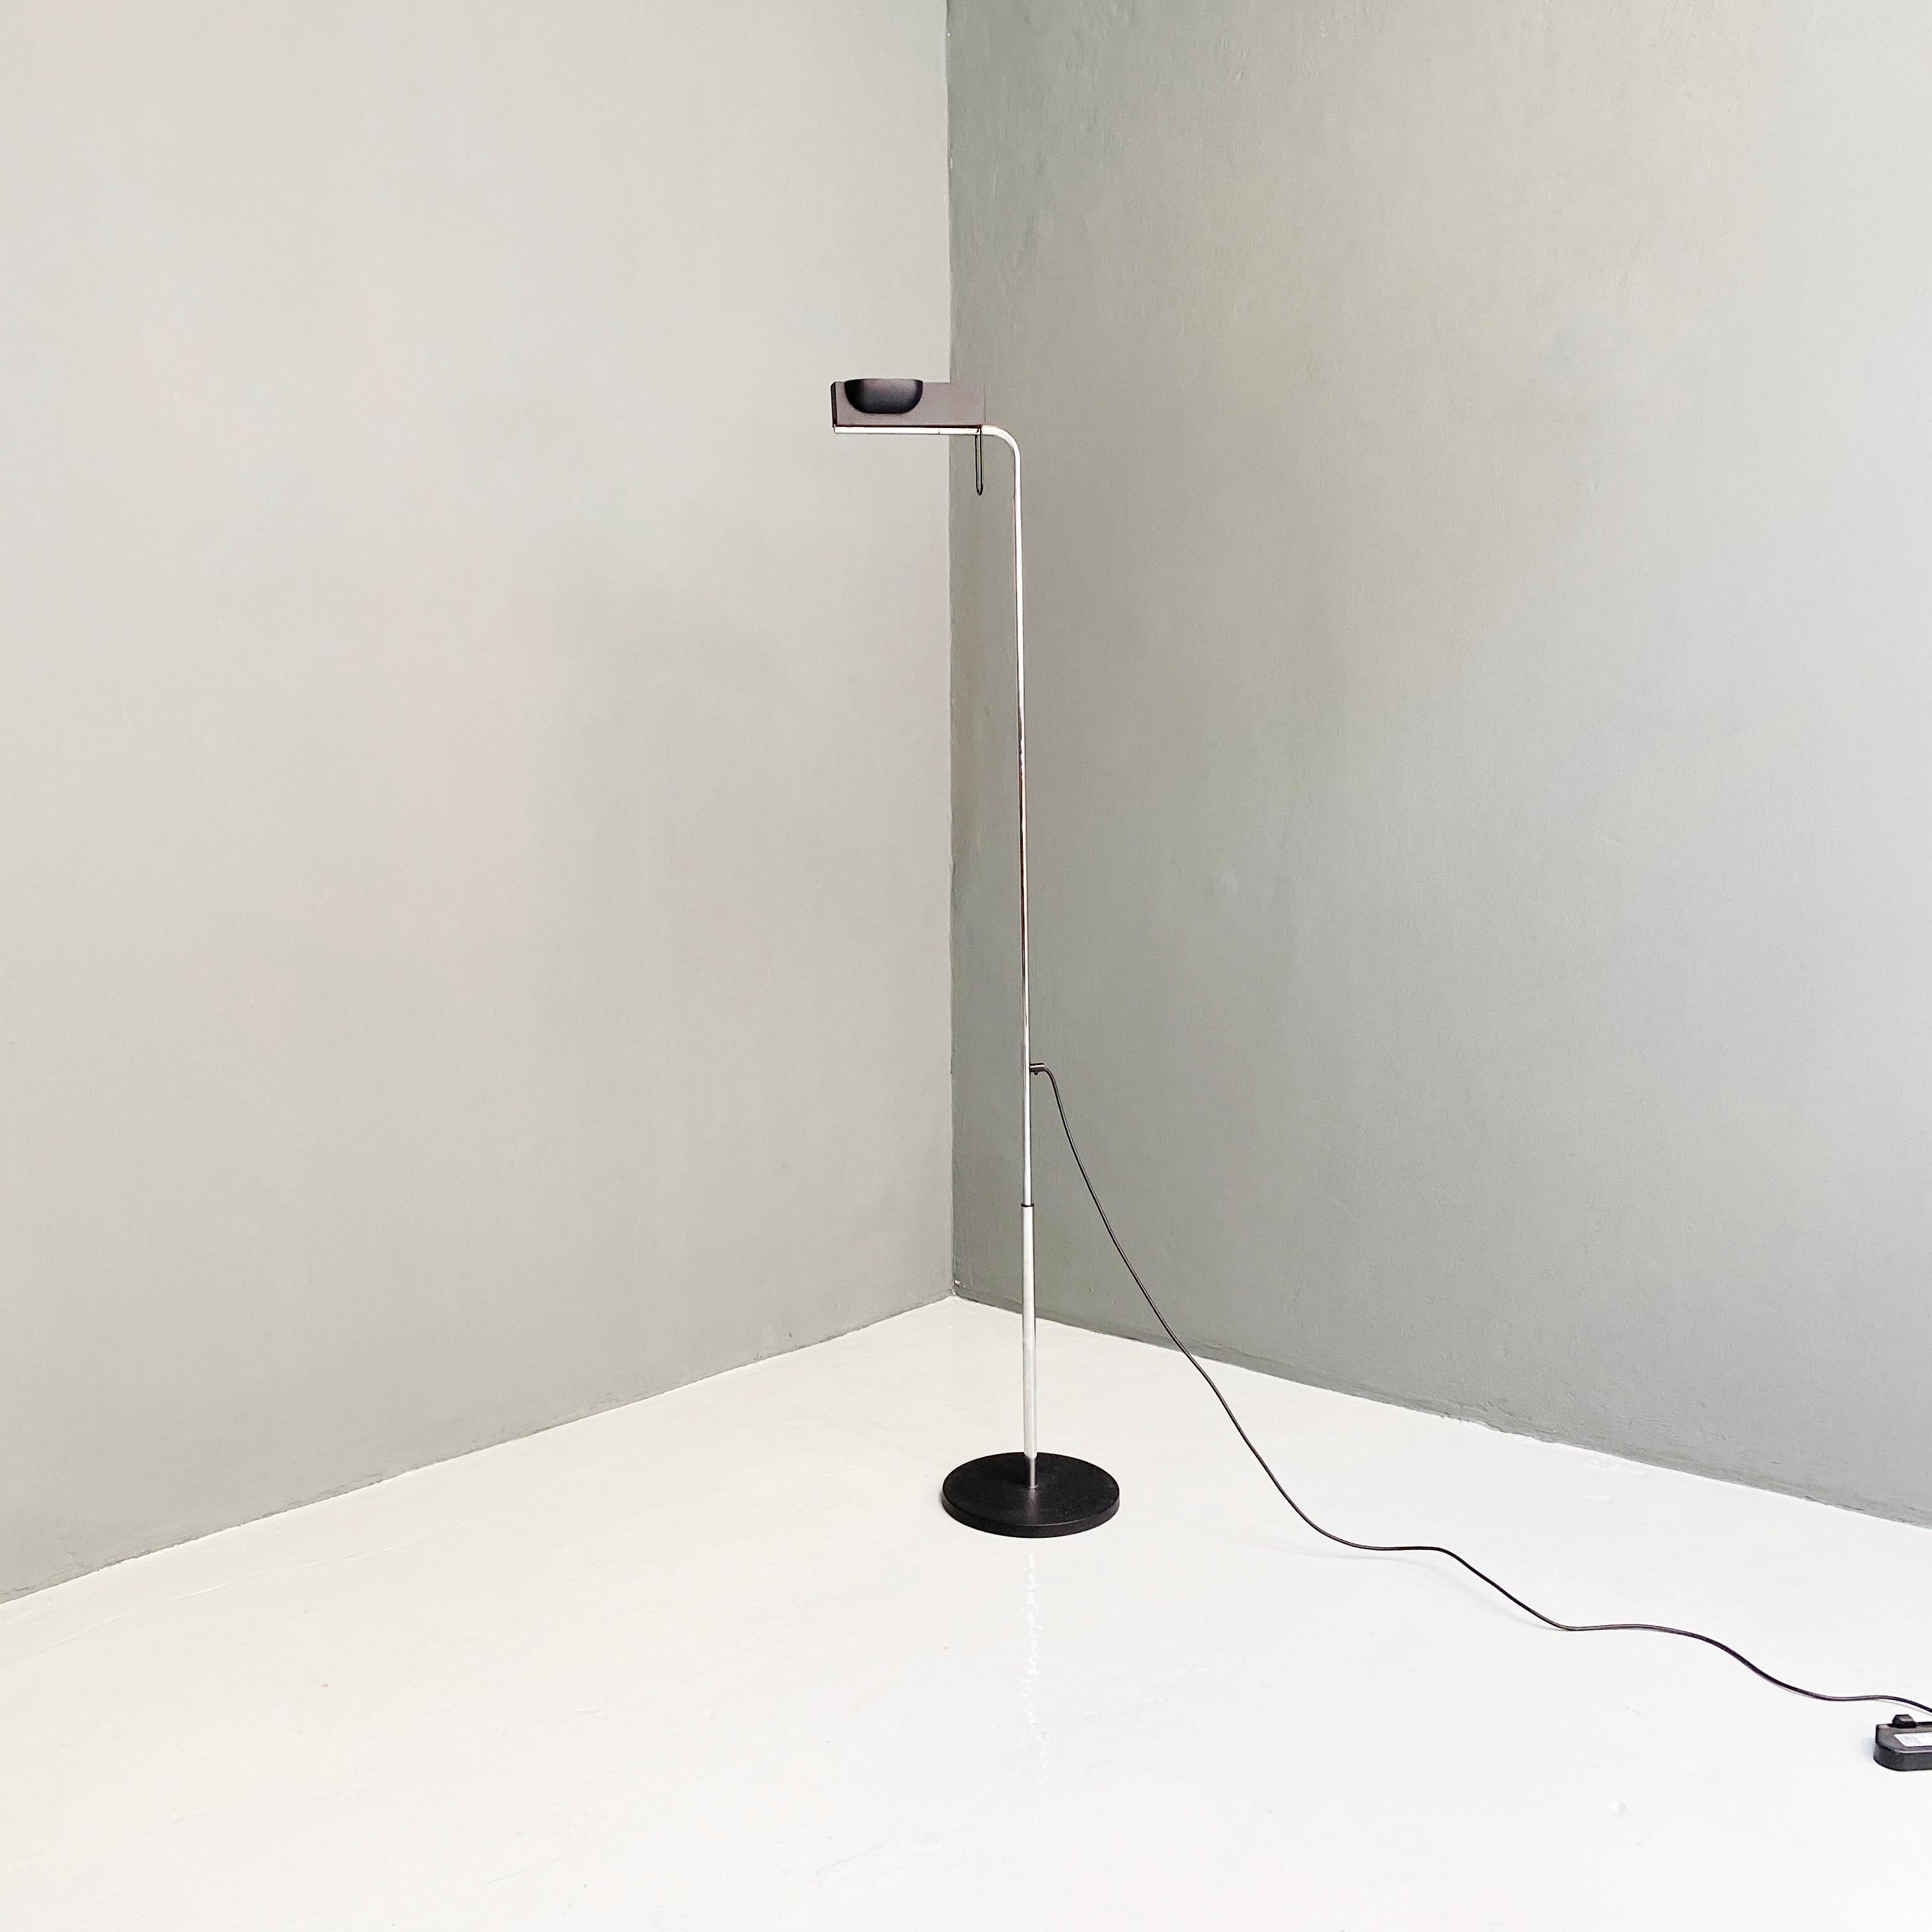 Black metal and chromed steel floor lamp, 1980s
Black floor lamp with chromed metal stem and round iron base, with adjustable metal lampshade.
1980s

Good conditions

Measurements in cm 80x193h.